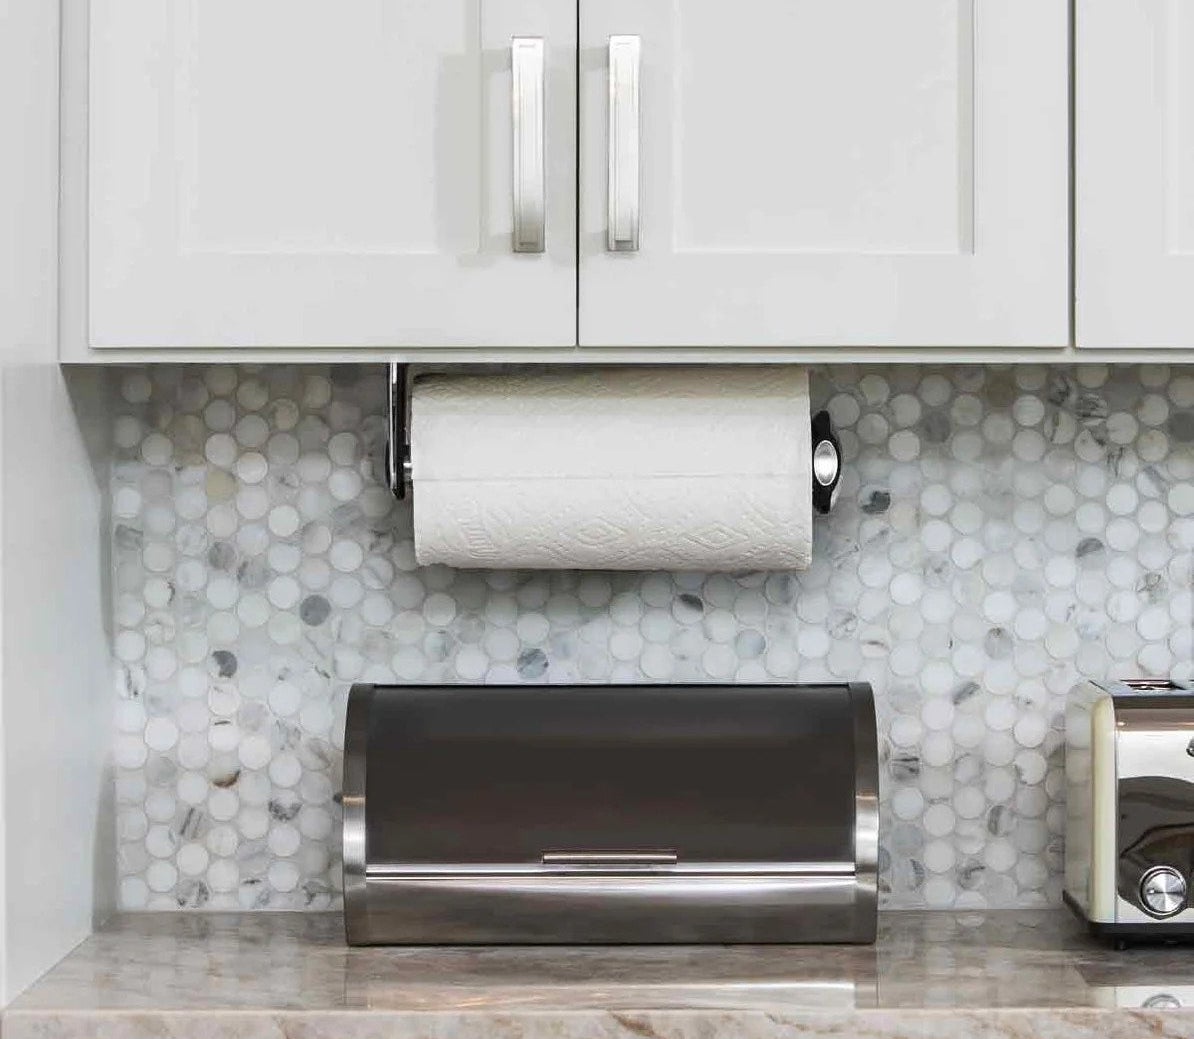 The paper towel holder mounted under cabinets